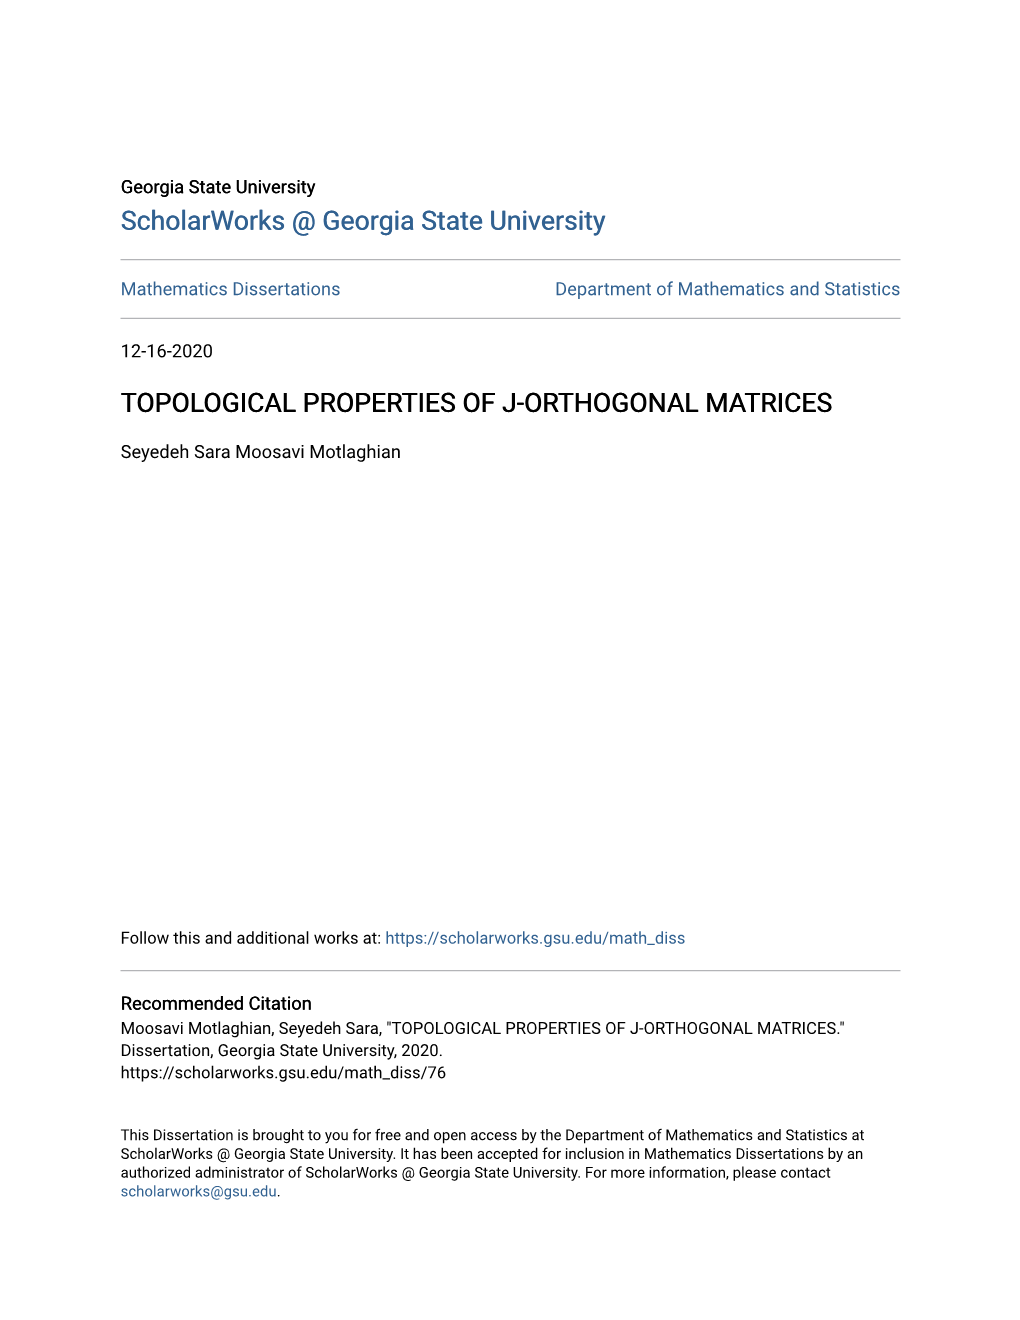 Topological Properties of J-Orthogonal Matrices